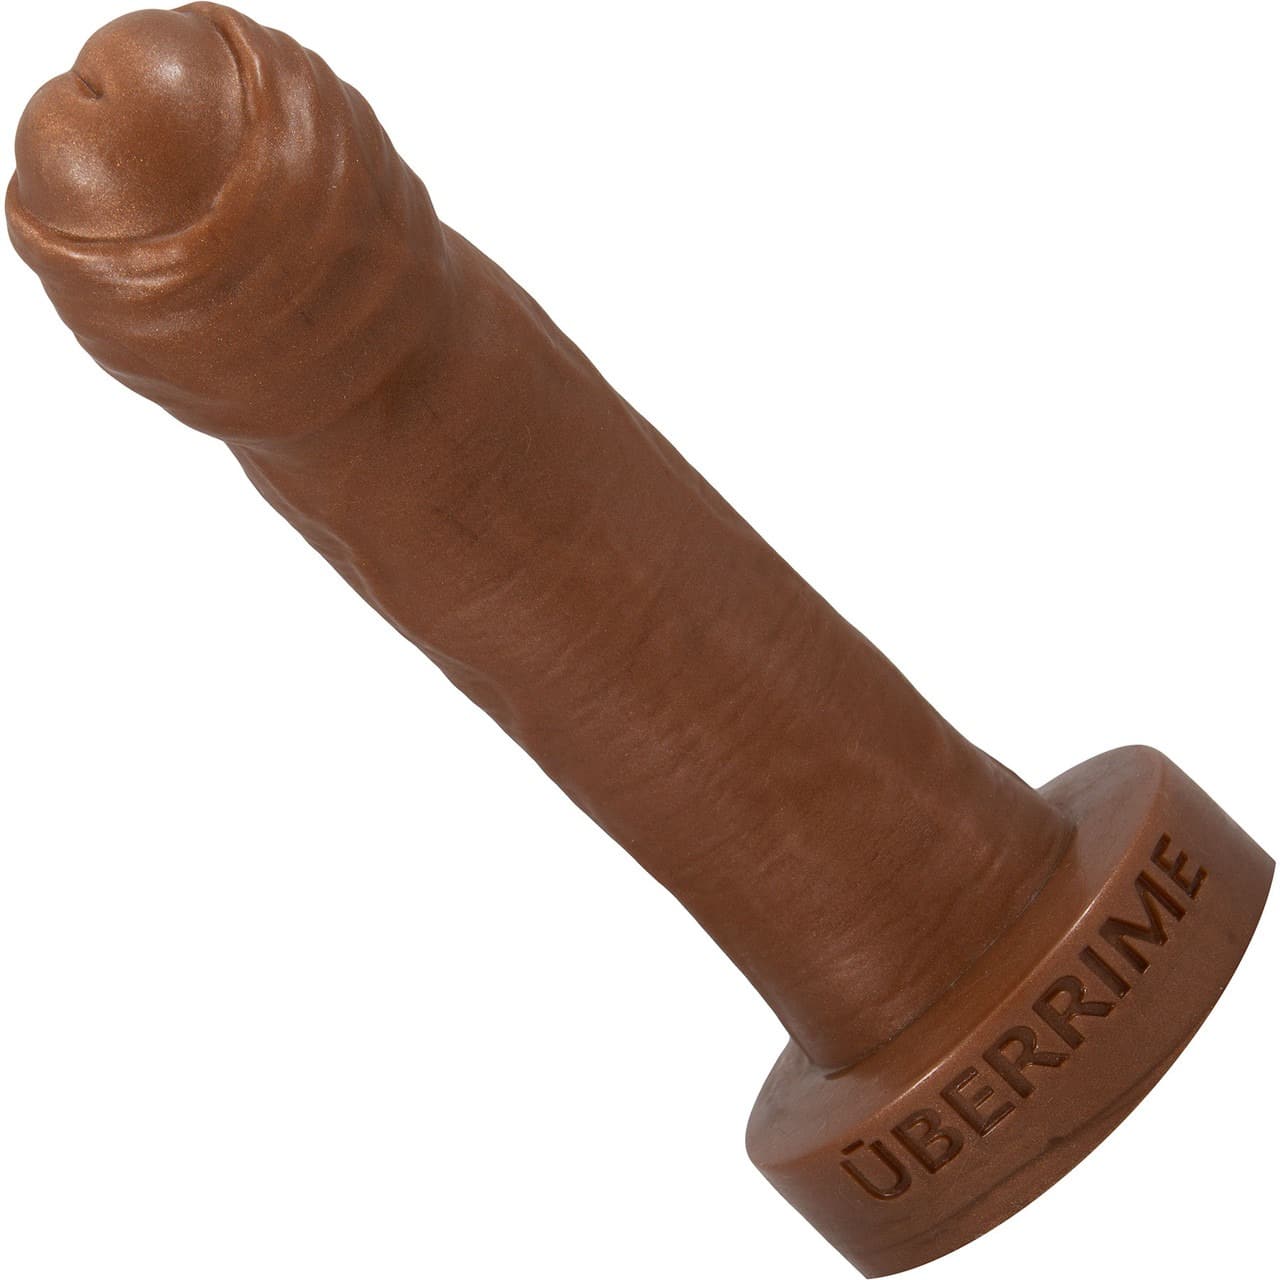 The Reservo Uncut 6.75" Silicone Dual Density Dildo by Uberrime. Slide 2